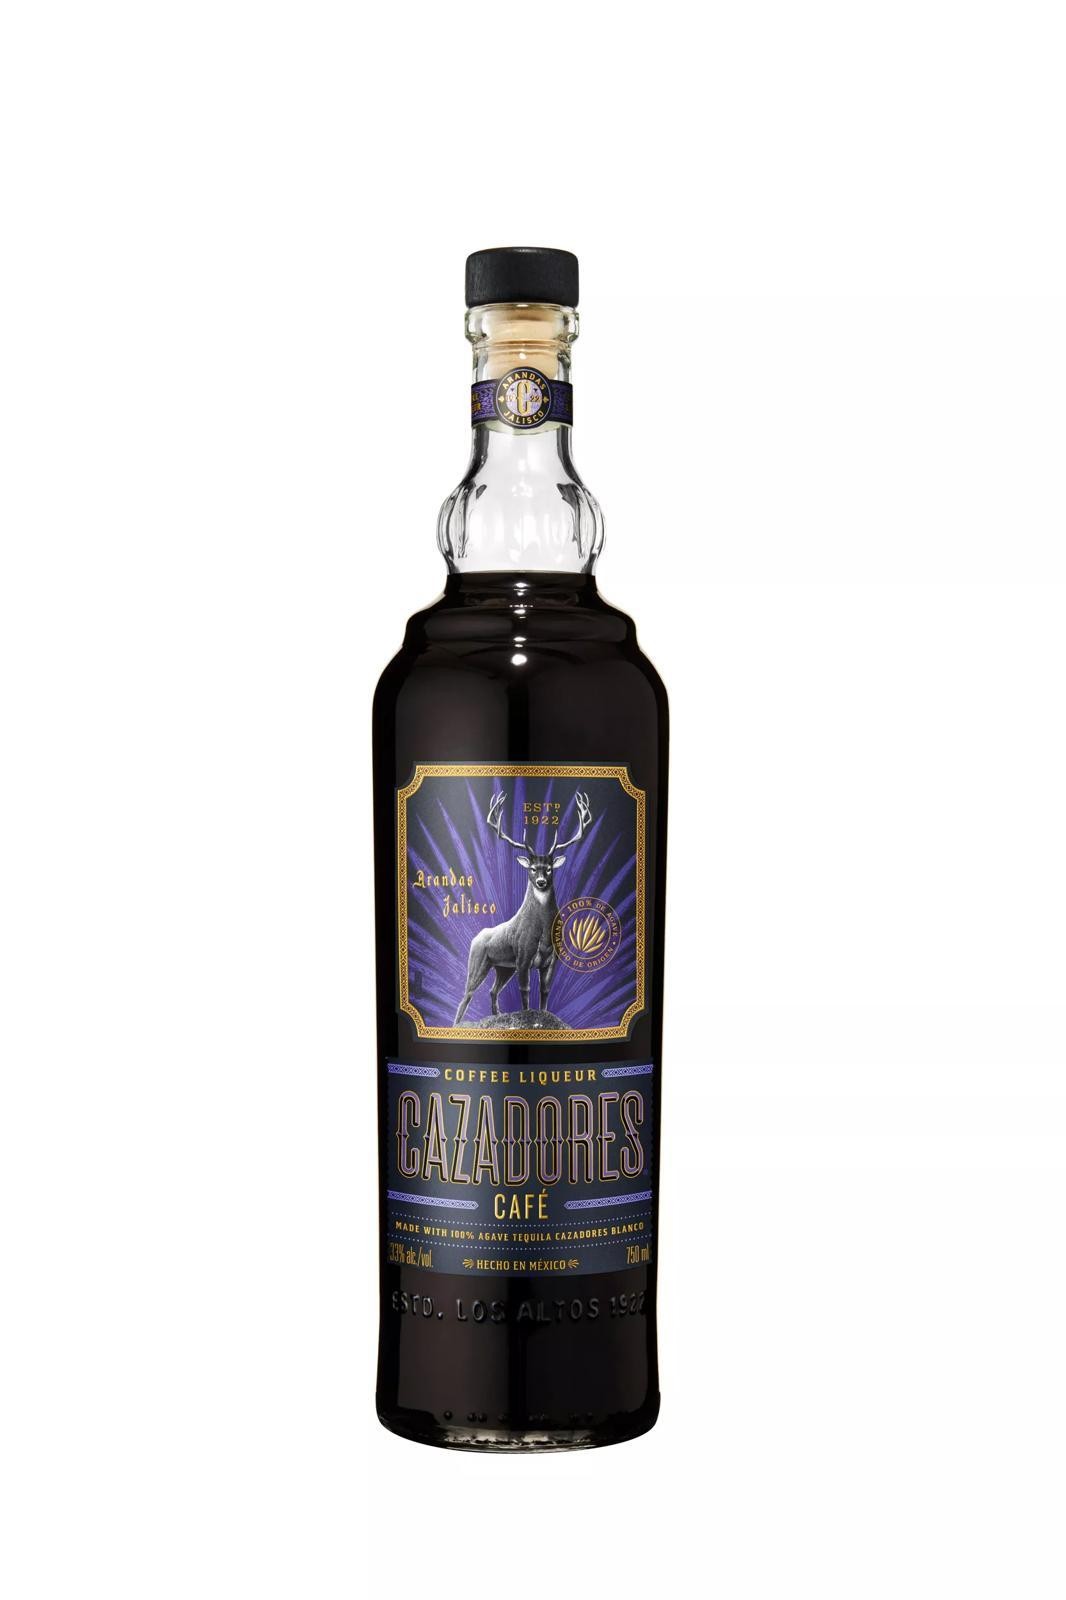 Tequila CAZADORES Cafe Coffee Liqueur Flavored - 750ml Bottle